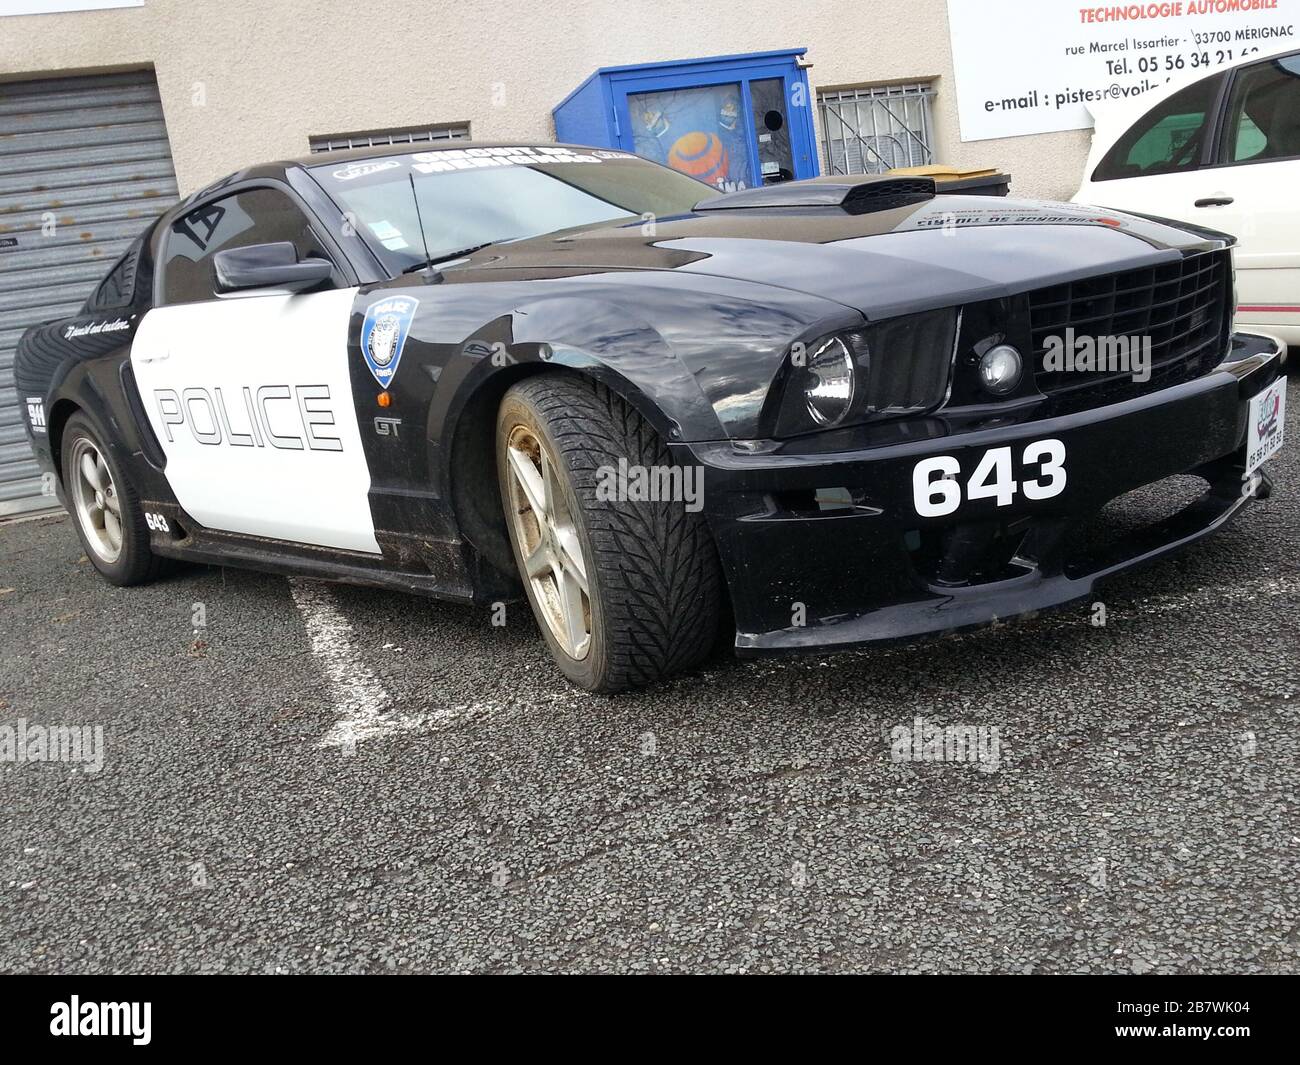 Bordeaux , Aquitaine / France - 11 19 2019 : Ford Mustang police car Transformers Film Decepticon black and white Stock Photo